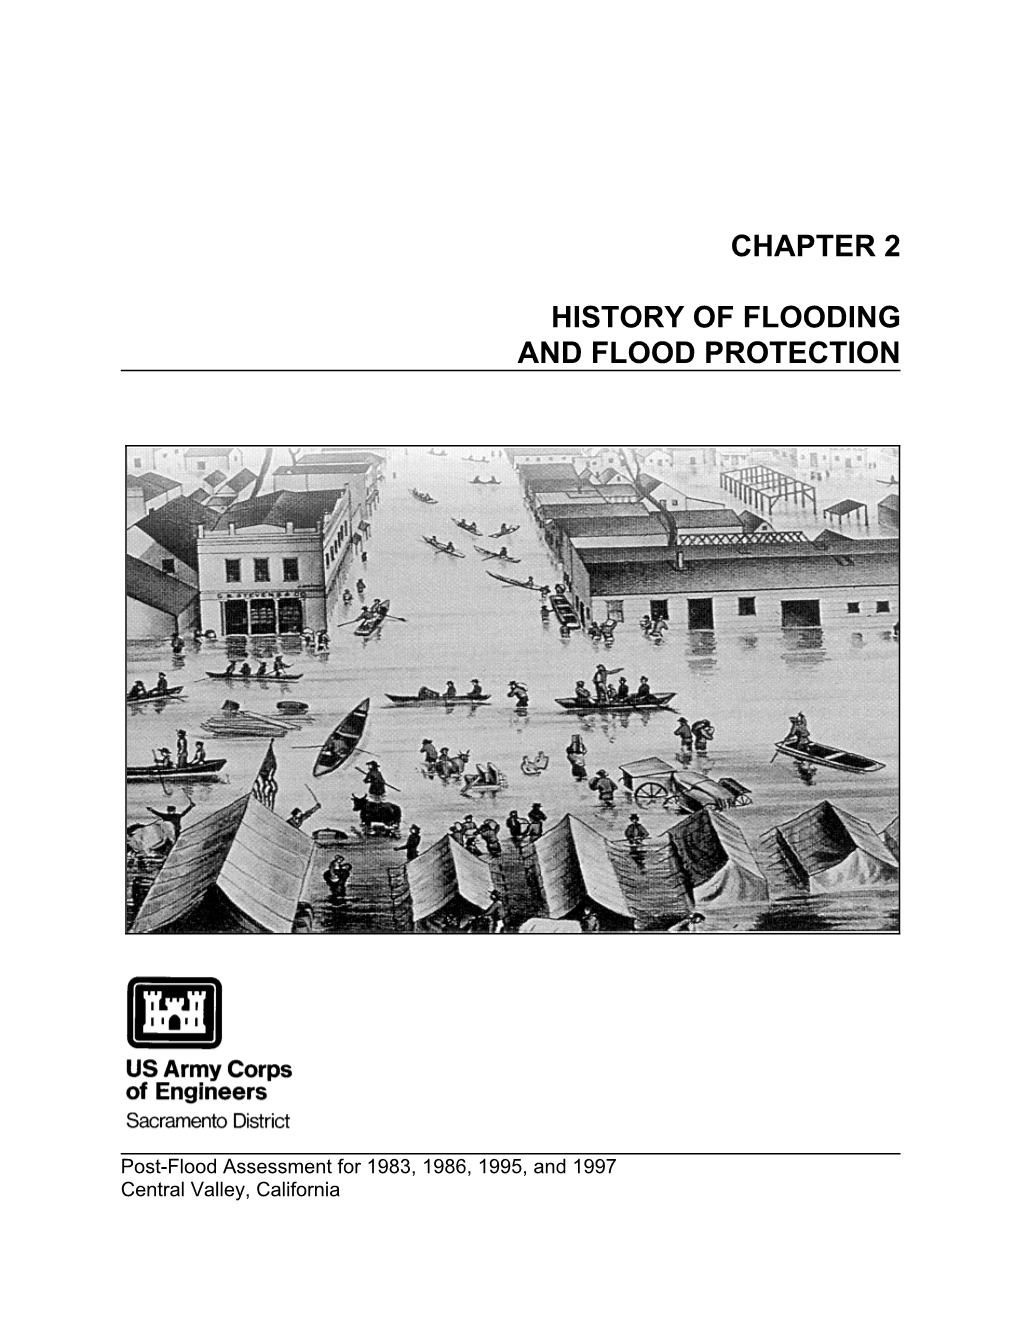 History of Flooding and Flood Protection